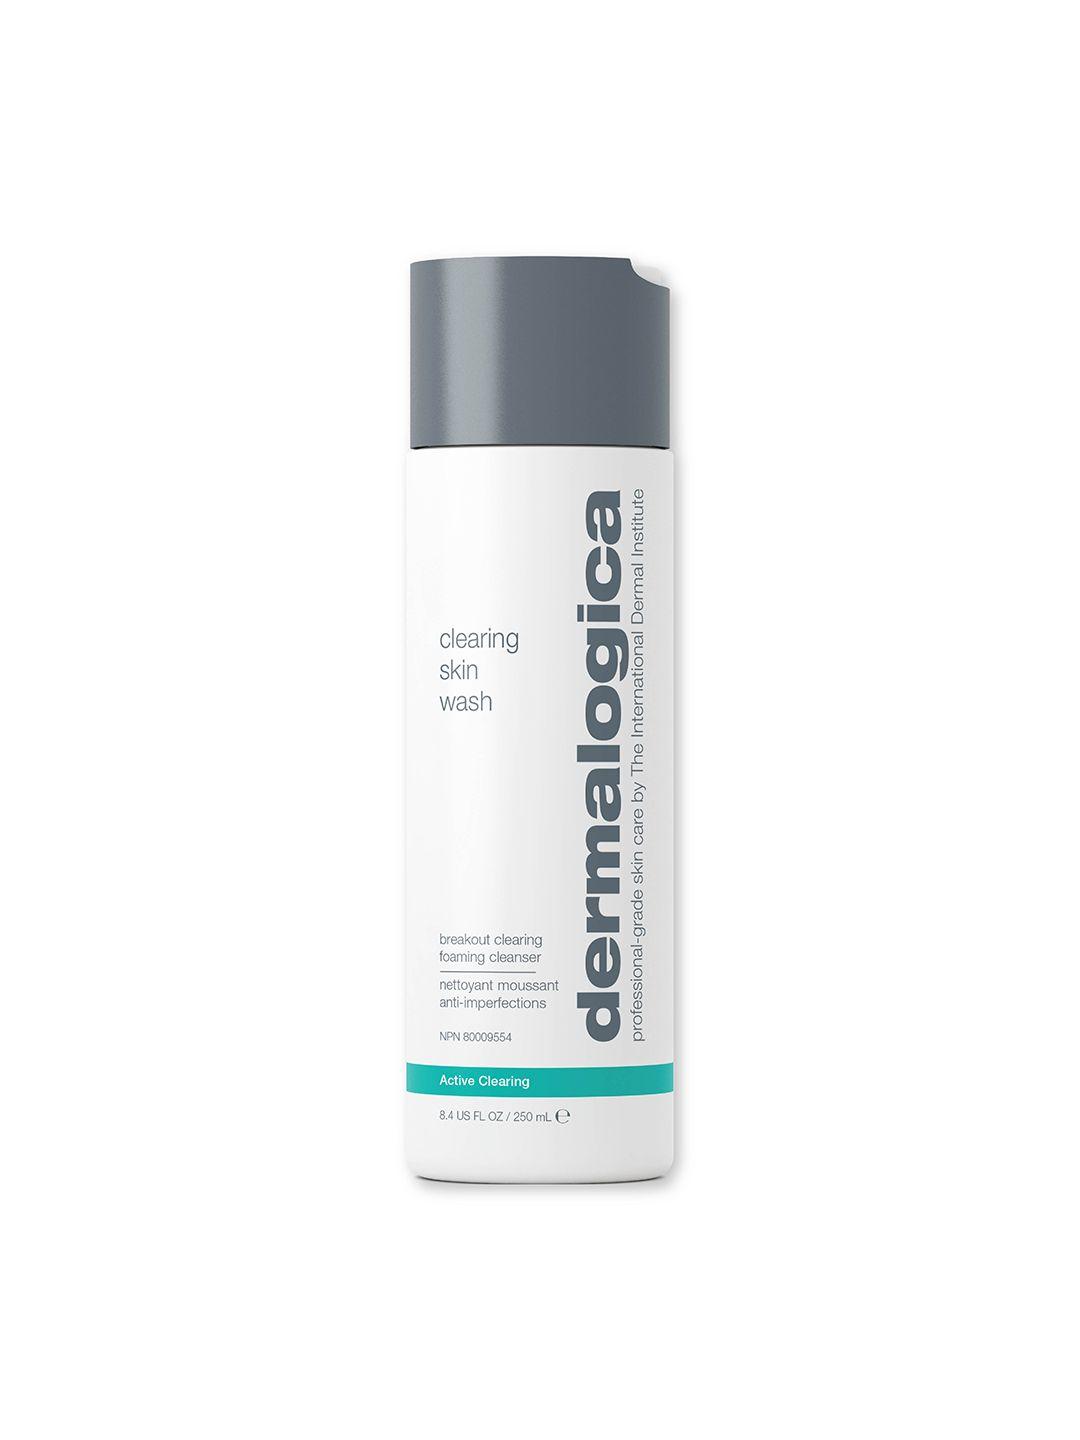 dermalogica active clearing skin wash with salicylic acid & lavender - 250 ml